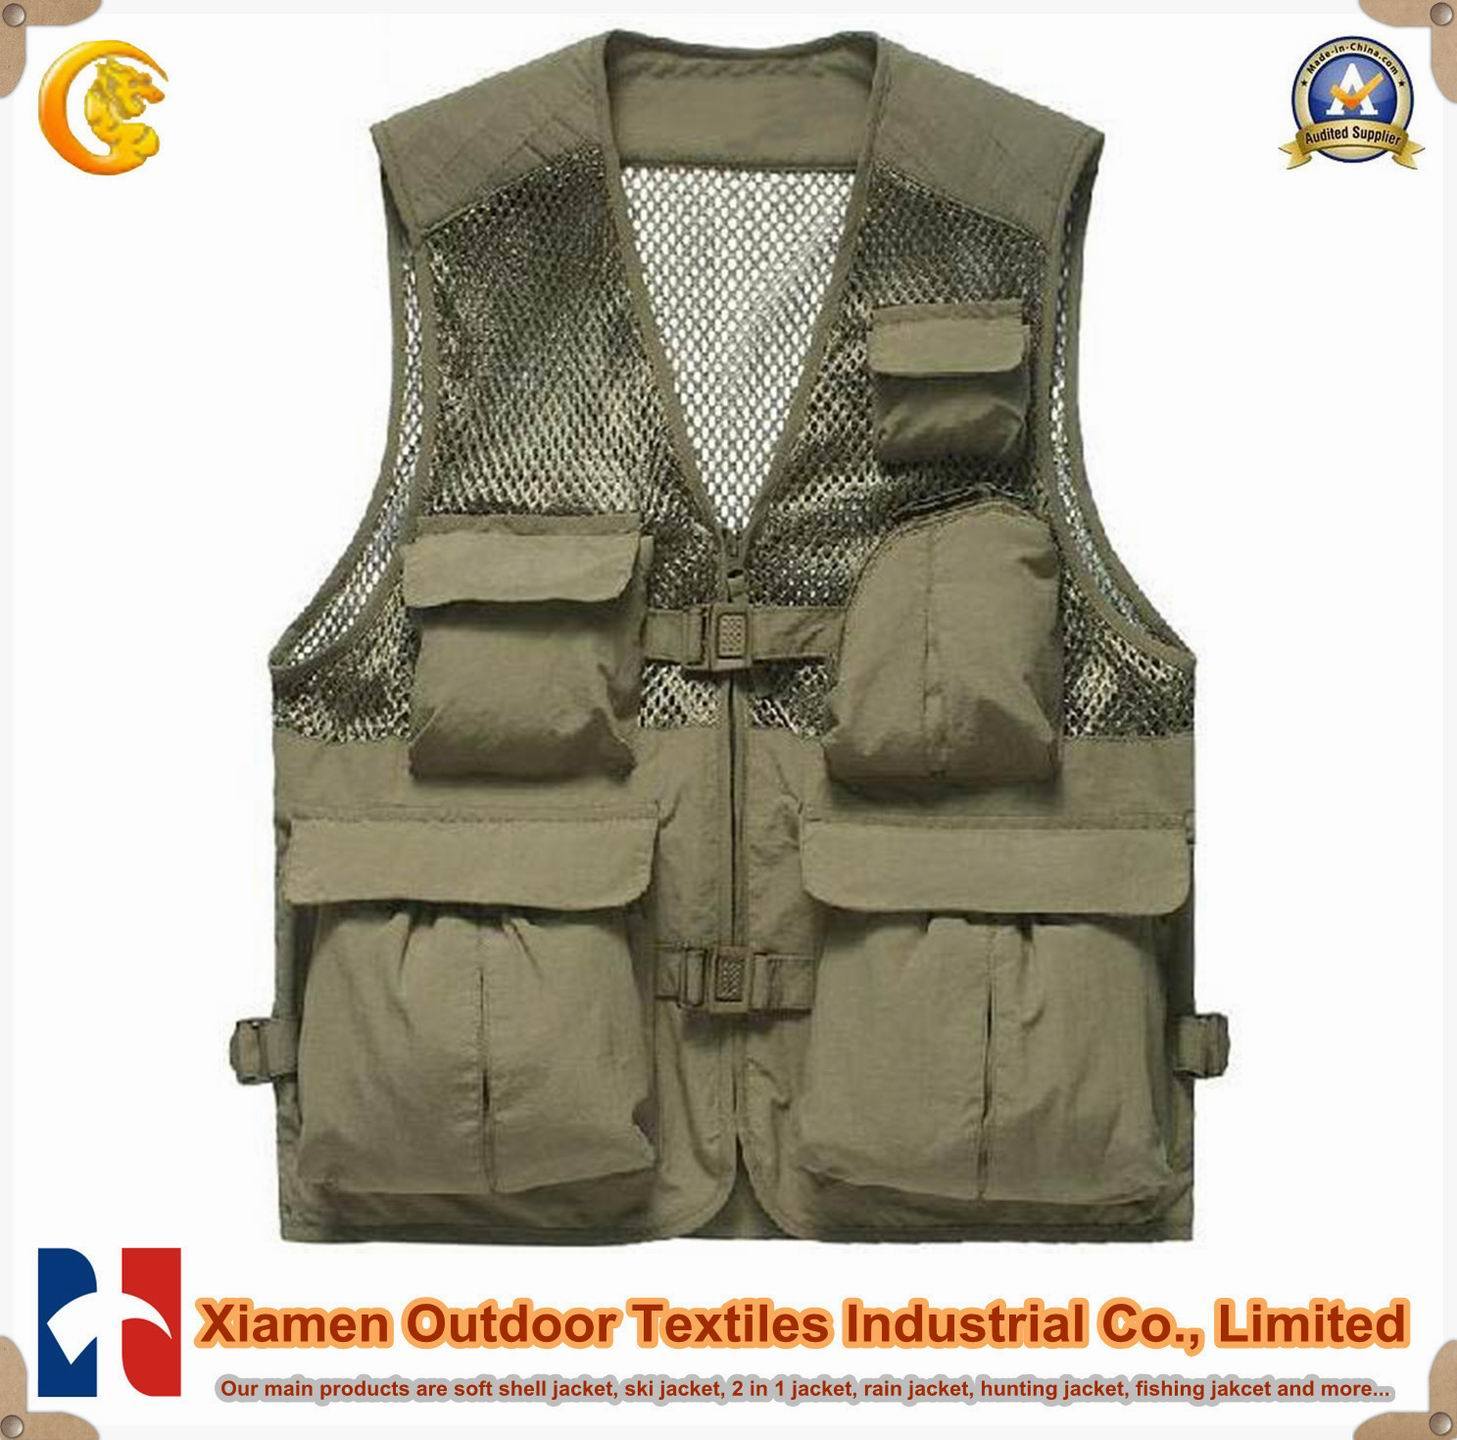 Fashion Functional Outdoor Fishing Safety Vest